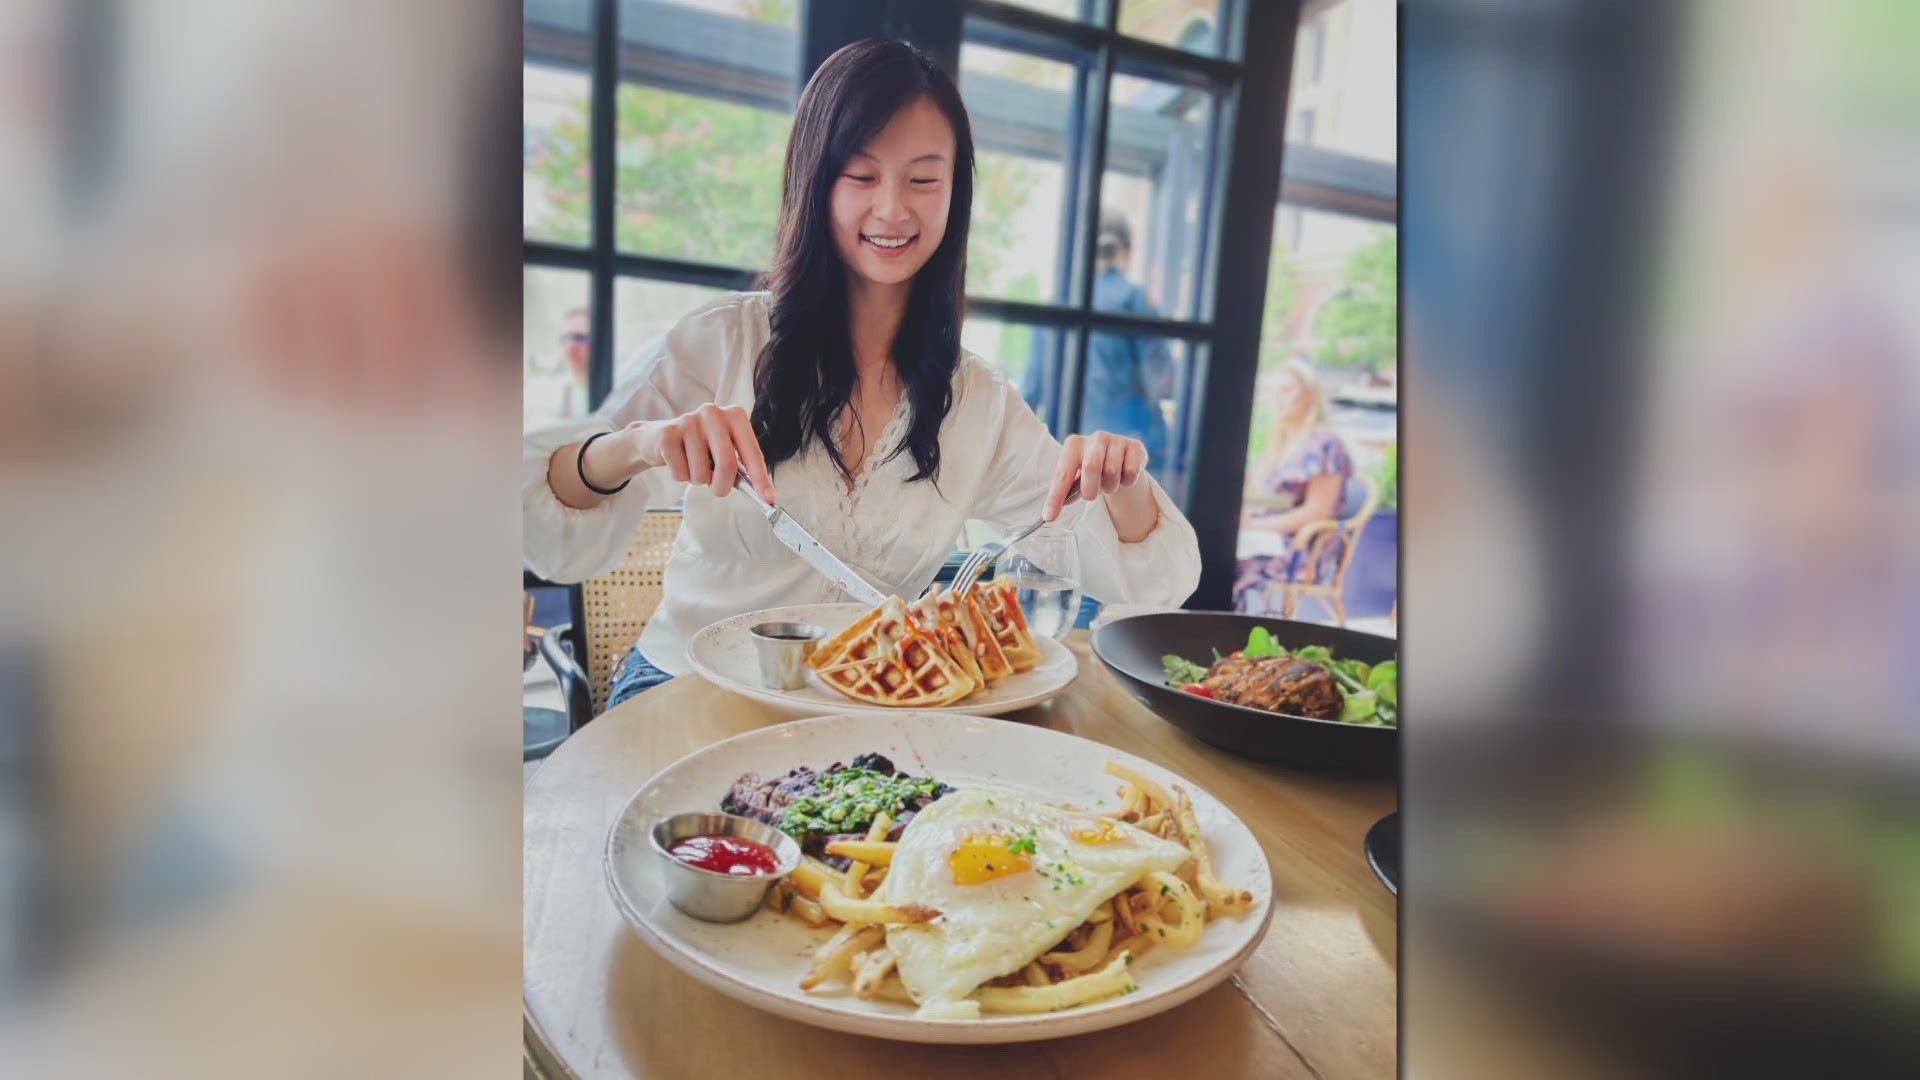 Amy Zhang started her Instagram account Still Hungry Dallas (@still_hungry_dallas) to share delicious dishes at restaurants and homecooked meals.